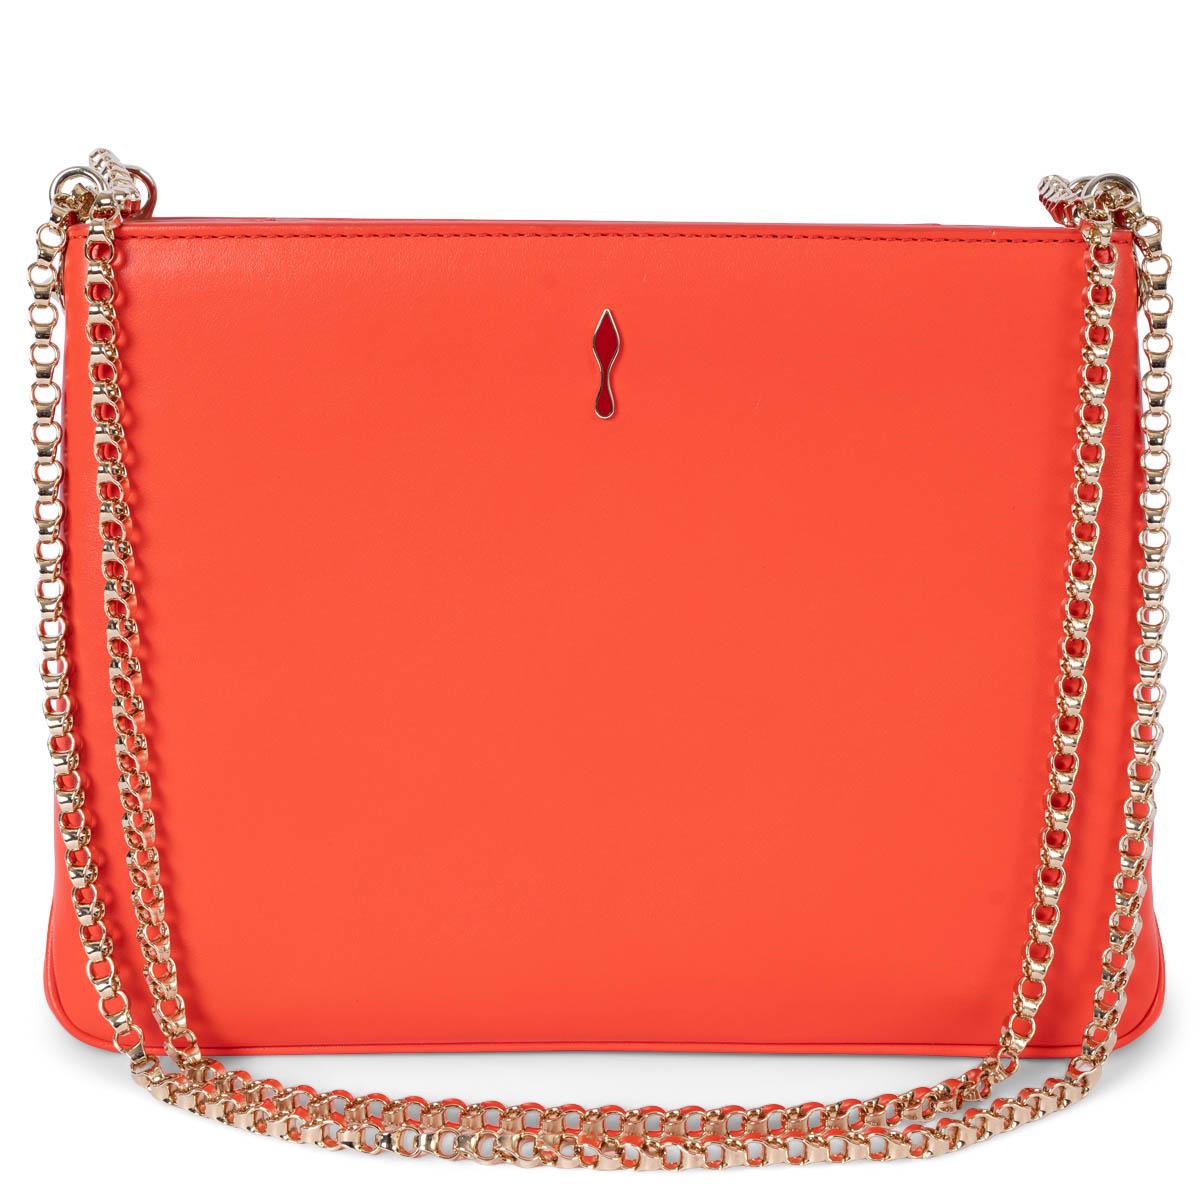 Women's CHRISTIAN LOUBOUTIN coral red TRILOUBOUI LARGE SPIKED Shoulder Bag For Sale